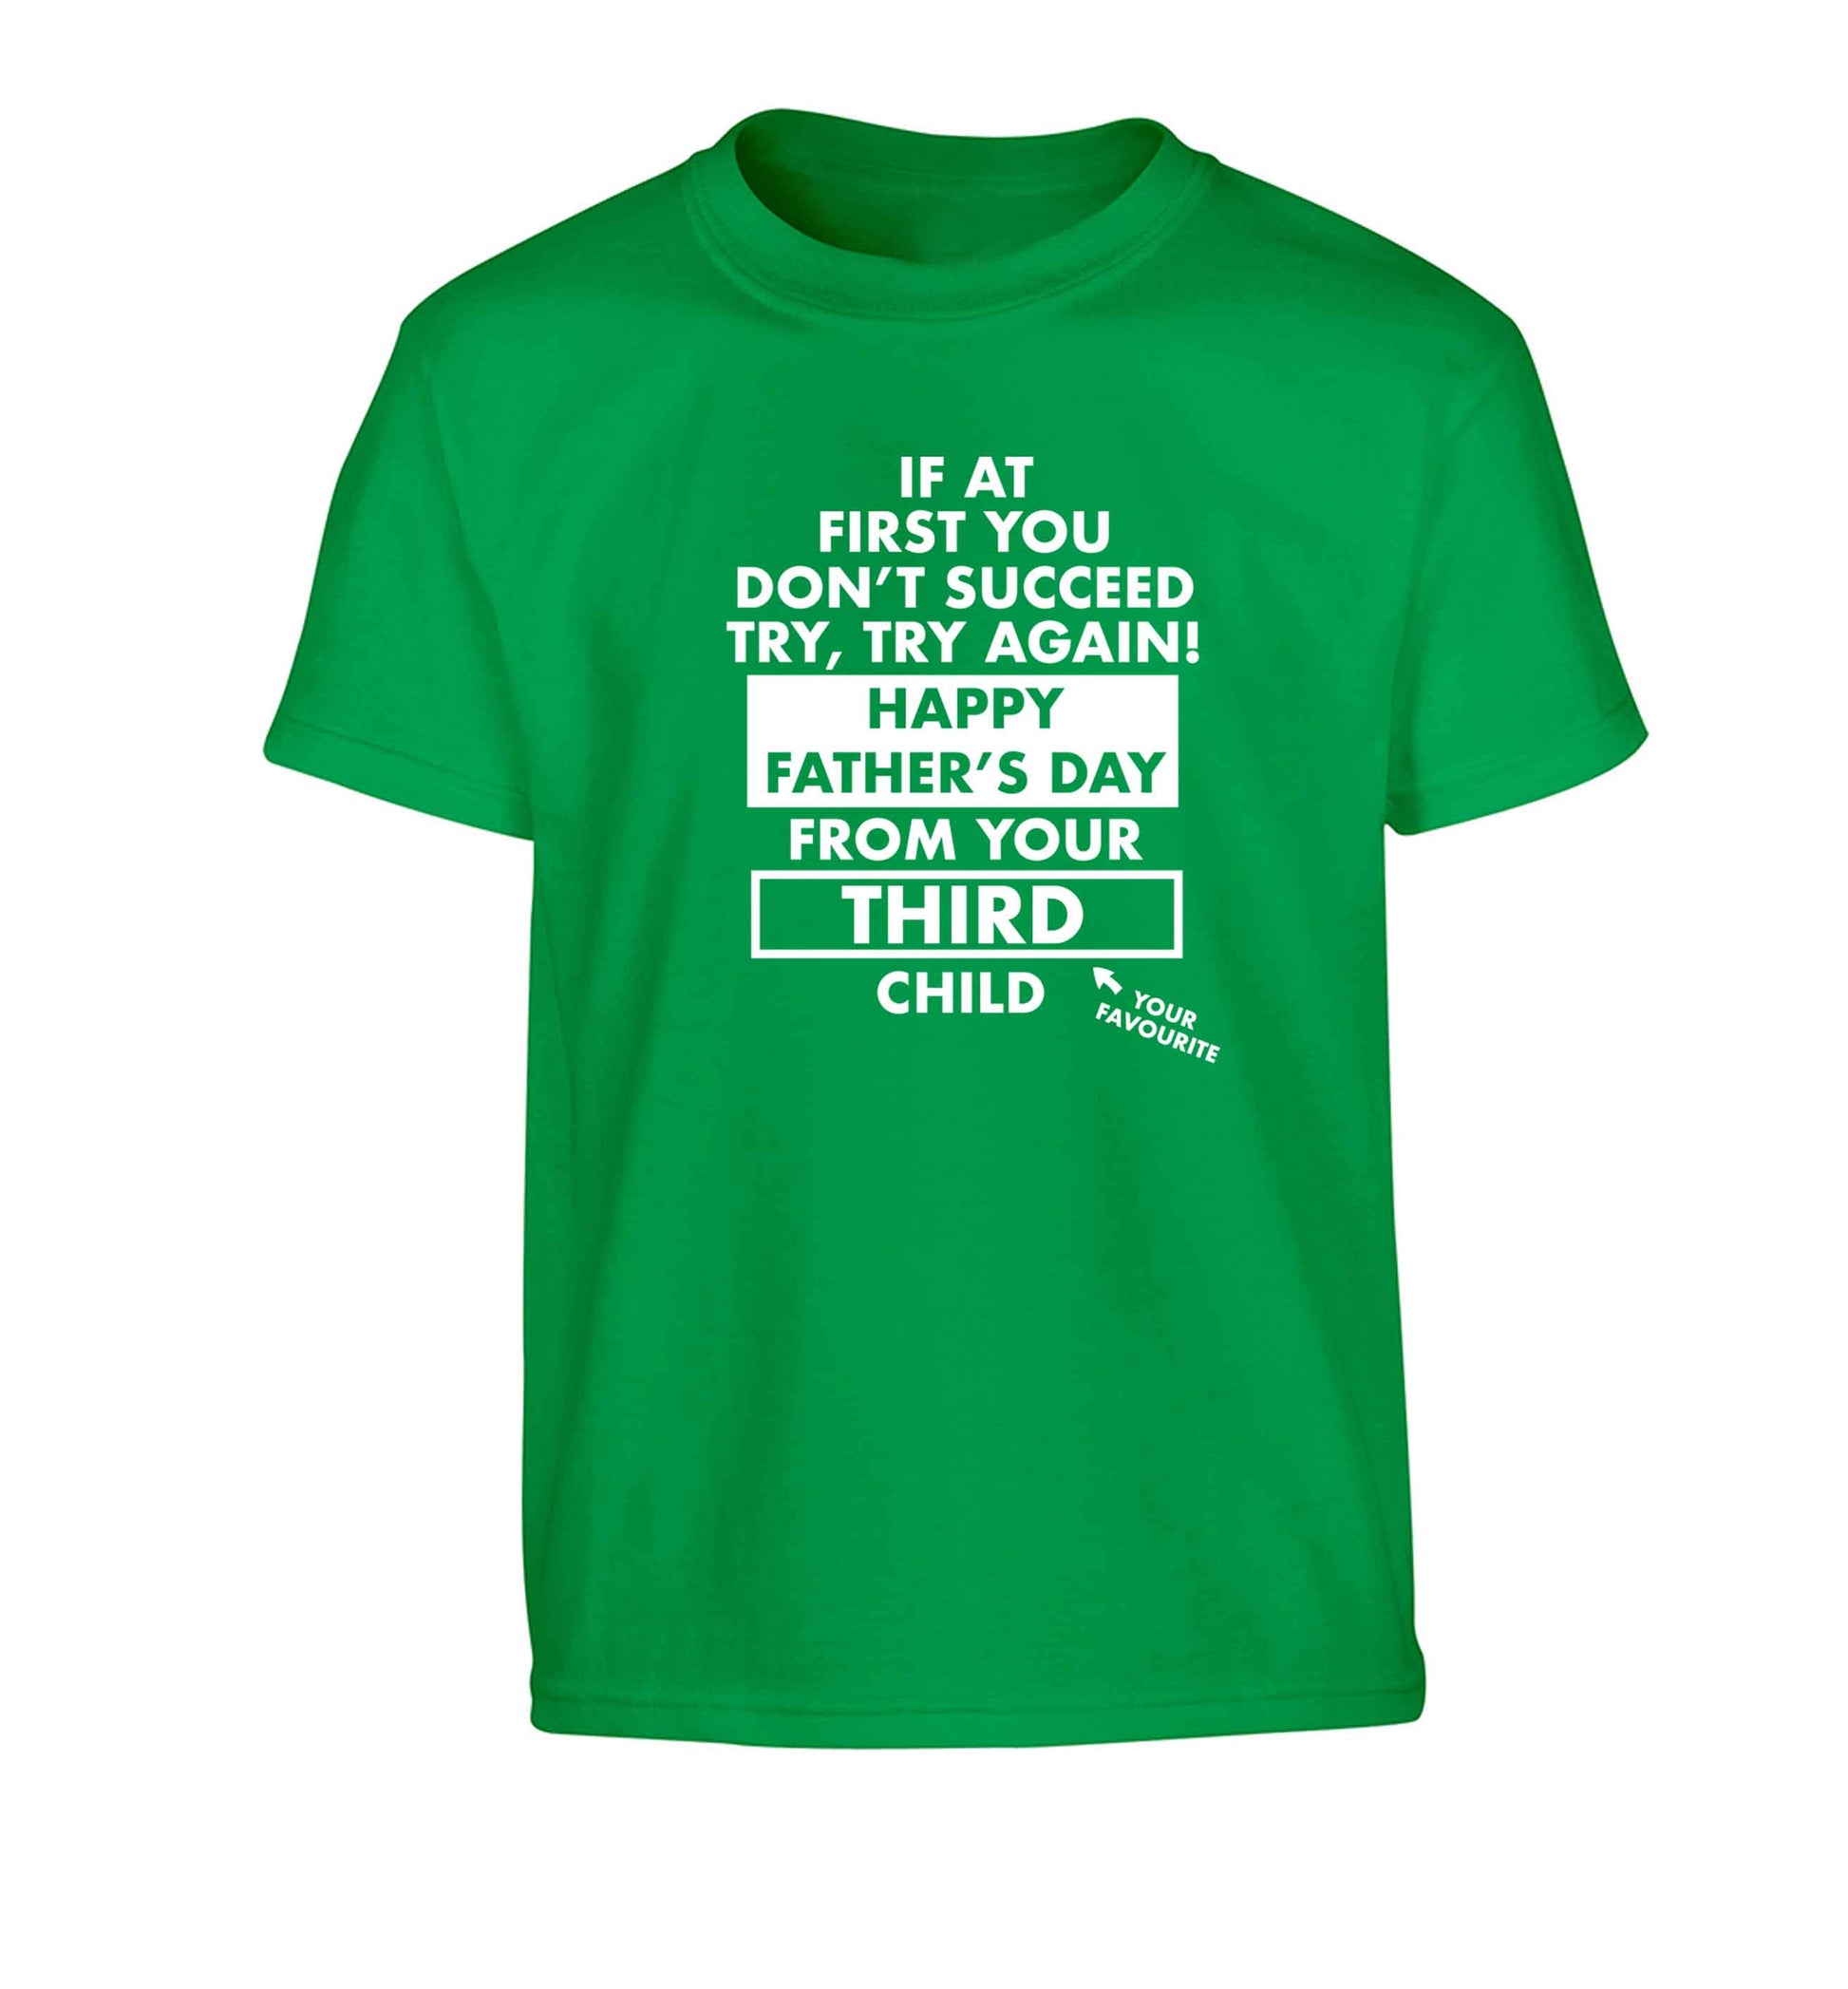 If at first you don't succeed try, try again Happy Father's day from your third child! Children's green Tshirt 12-13 Years